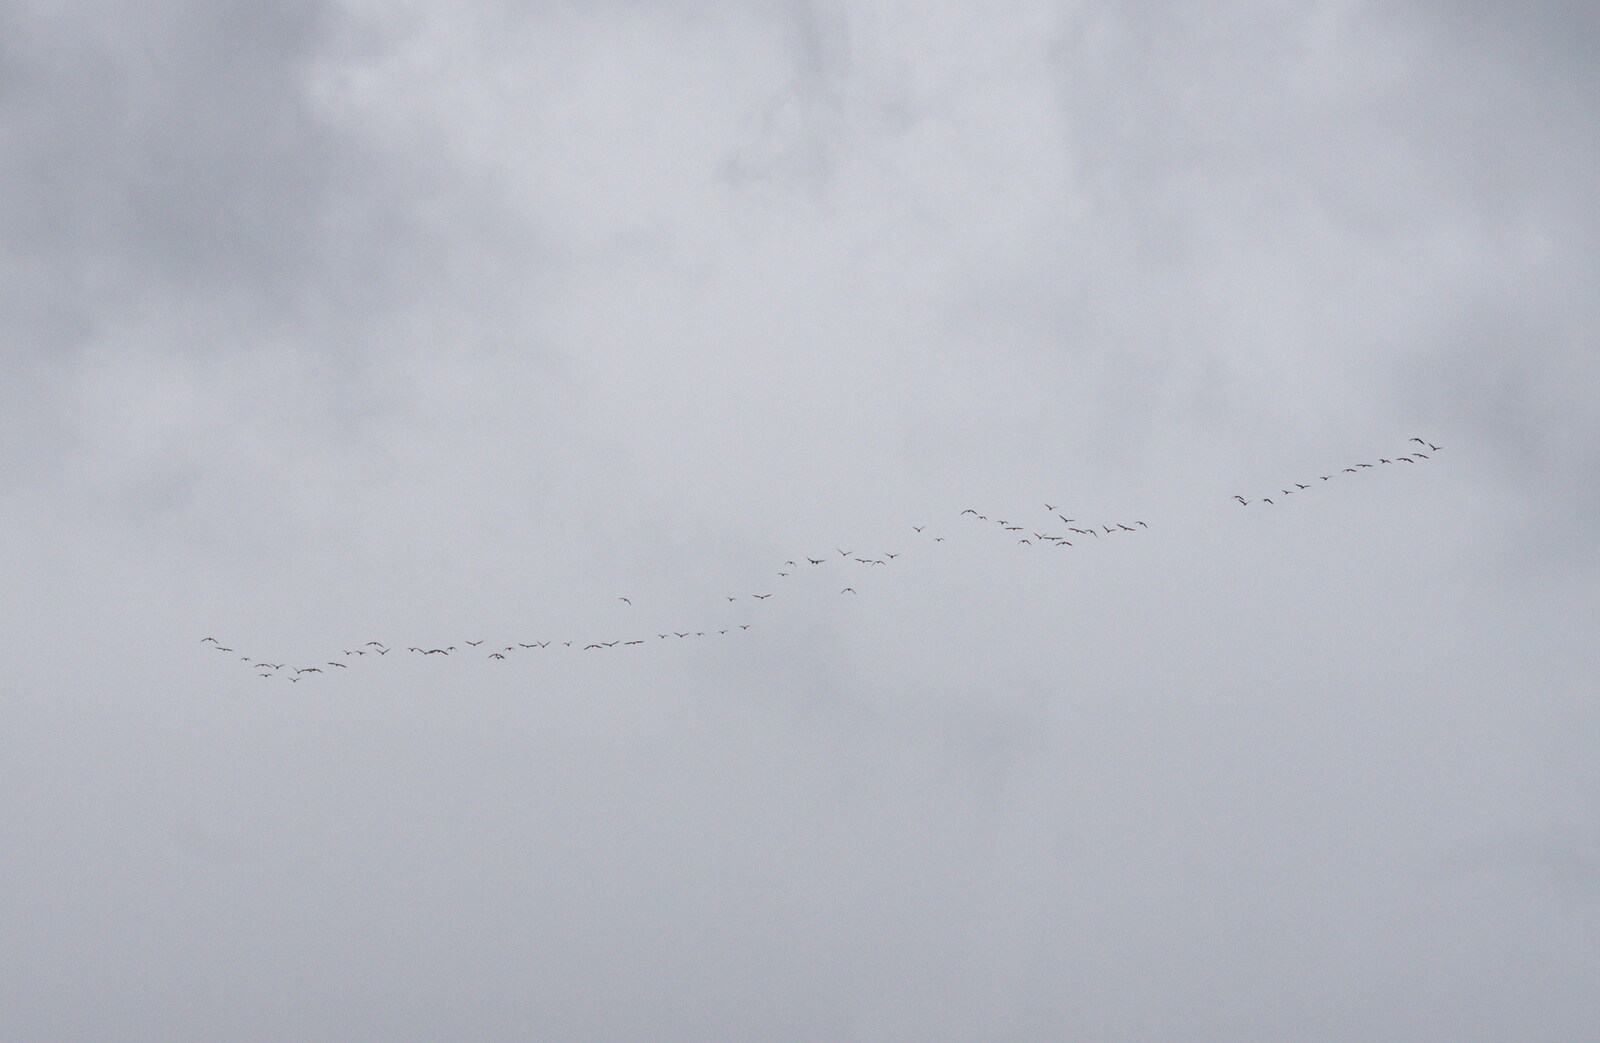 A flock of geese practice their migration patterns from An Optimistic Camping Weekend, Waxham Sands, Norfolk - 22nd September 2018